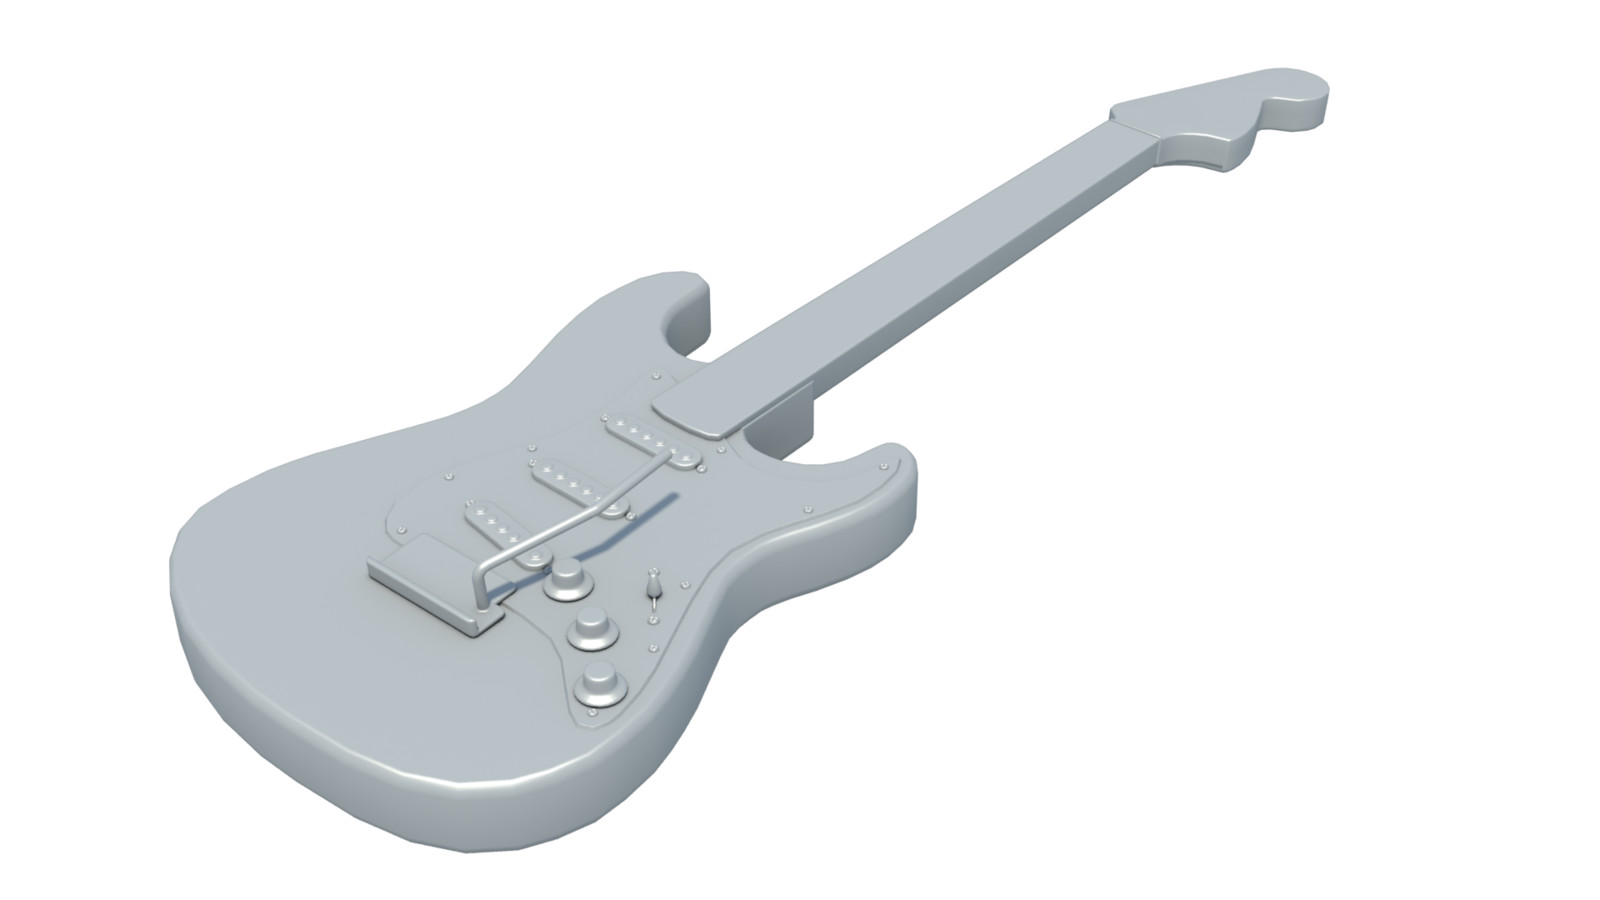 Even though the final art is entirely vector, I modeled the guitar in 3D to be sure I got the perspective right. modeled and rendered in Modo.